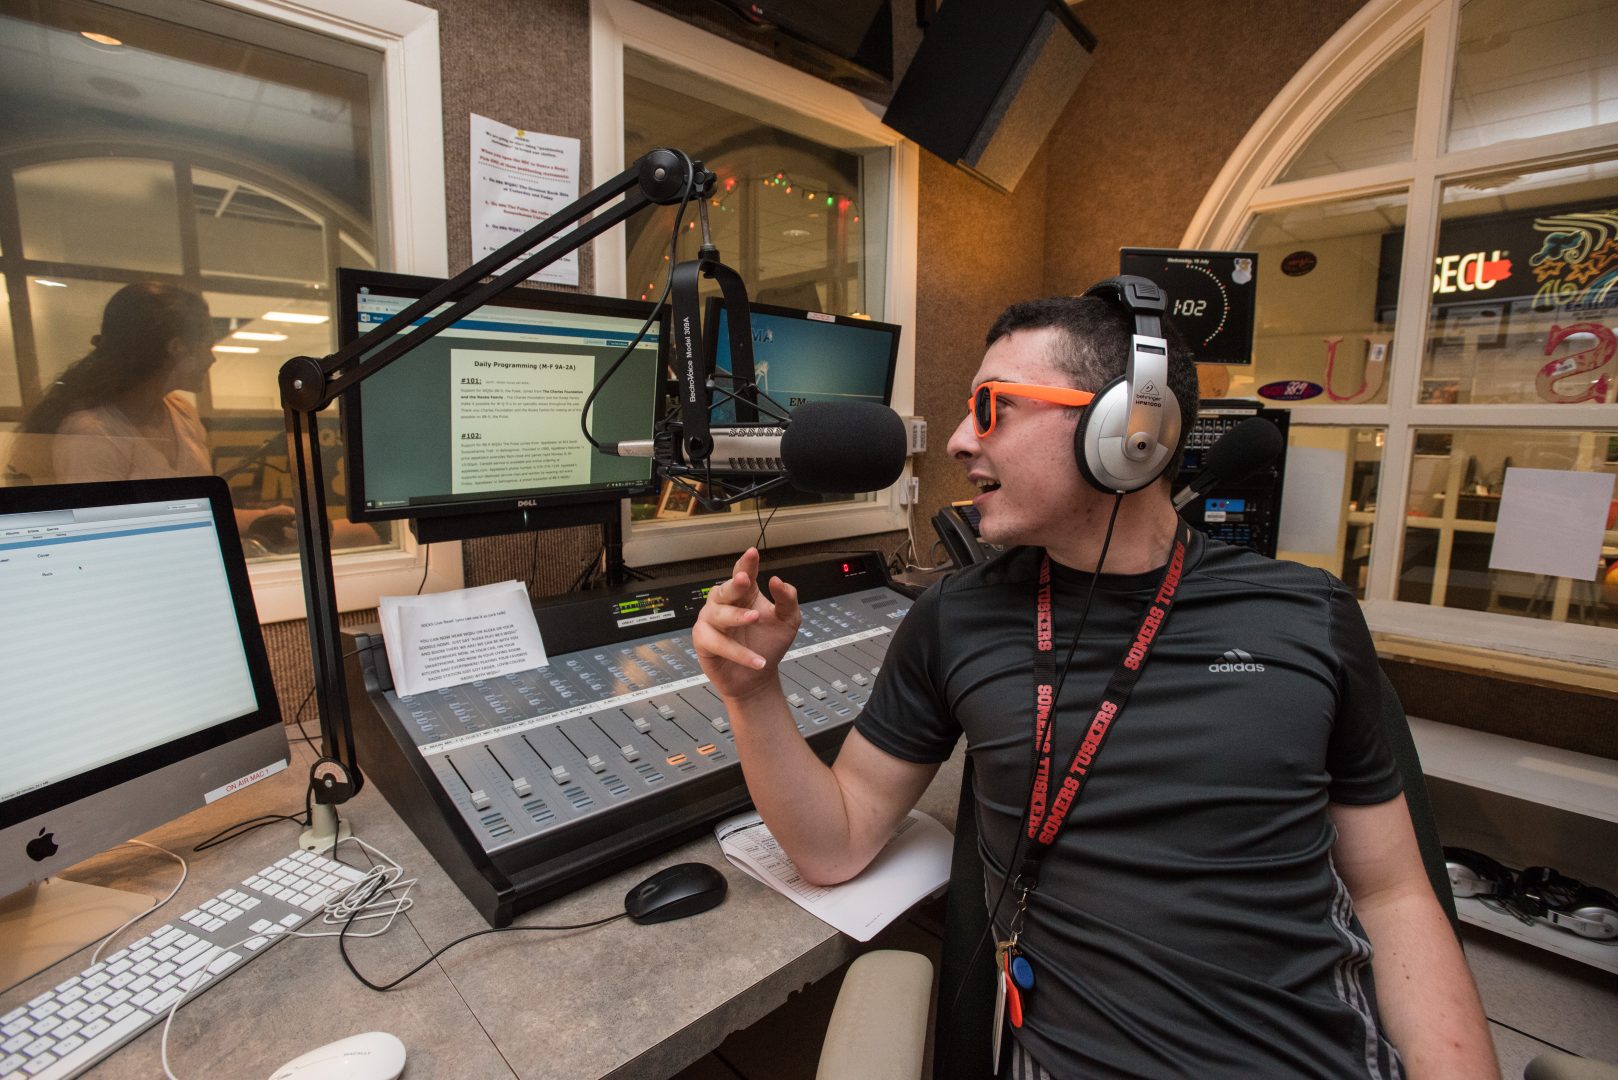 A Susquehanna University student is on-air at WQSU-FM. The coronavirus pandemic forced the school to close the campus. Now, dozens of volunteer students are broadcasting from their homes to keep the community informed on the latest developments.